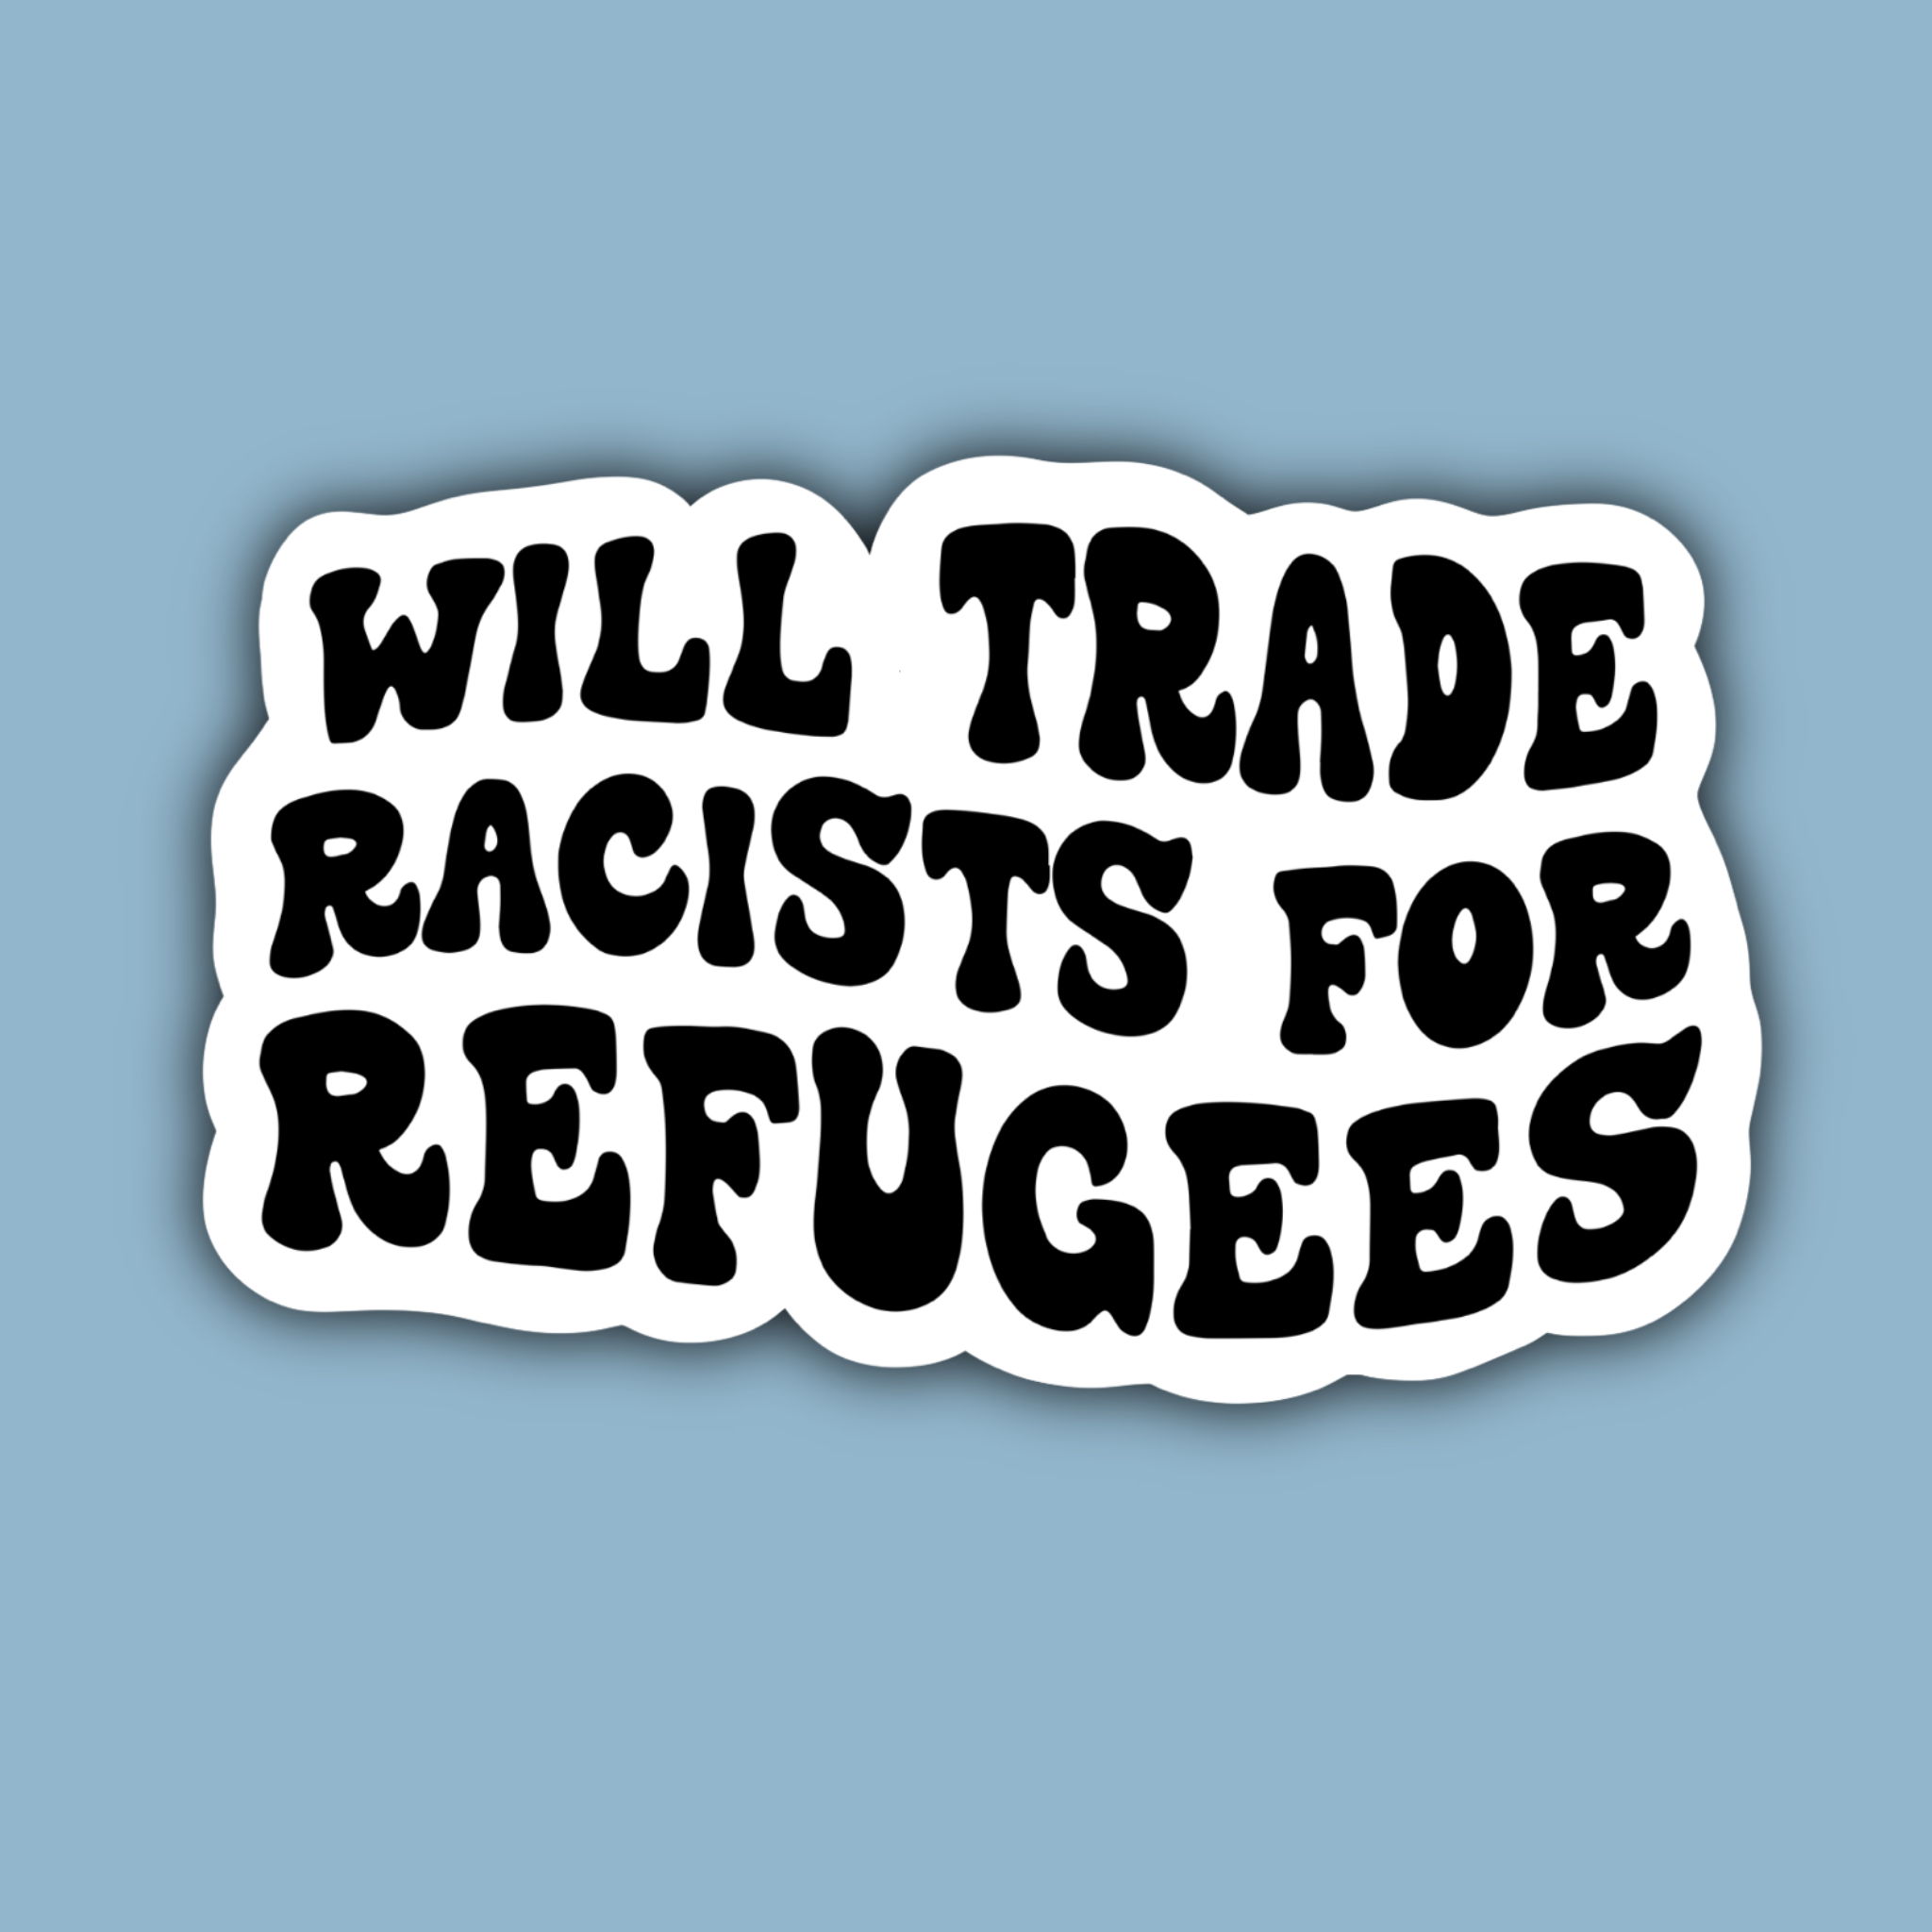 Will Trade Racists for Refugees Human Rights Sticker